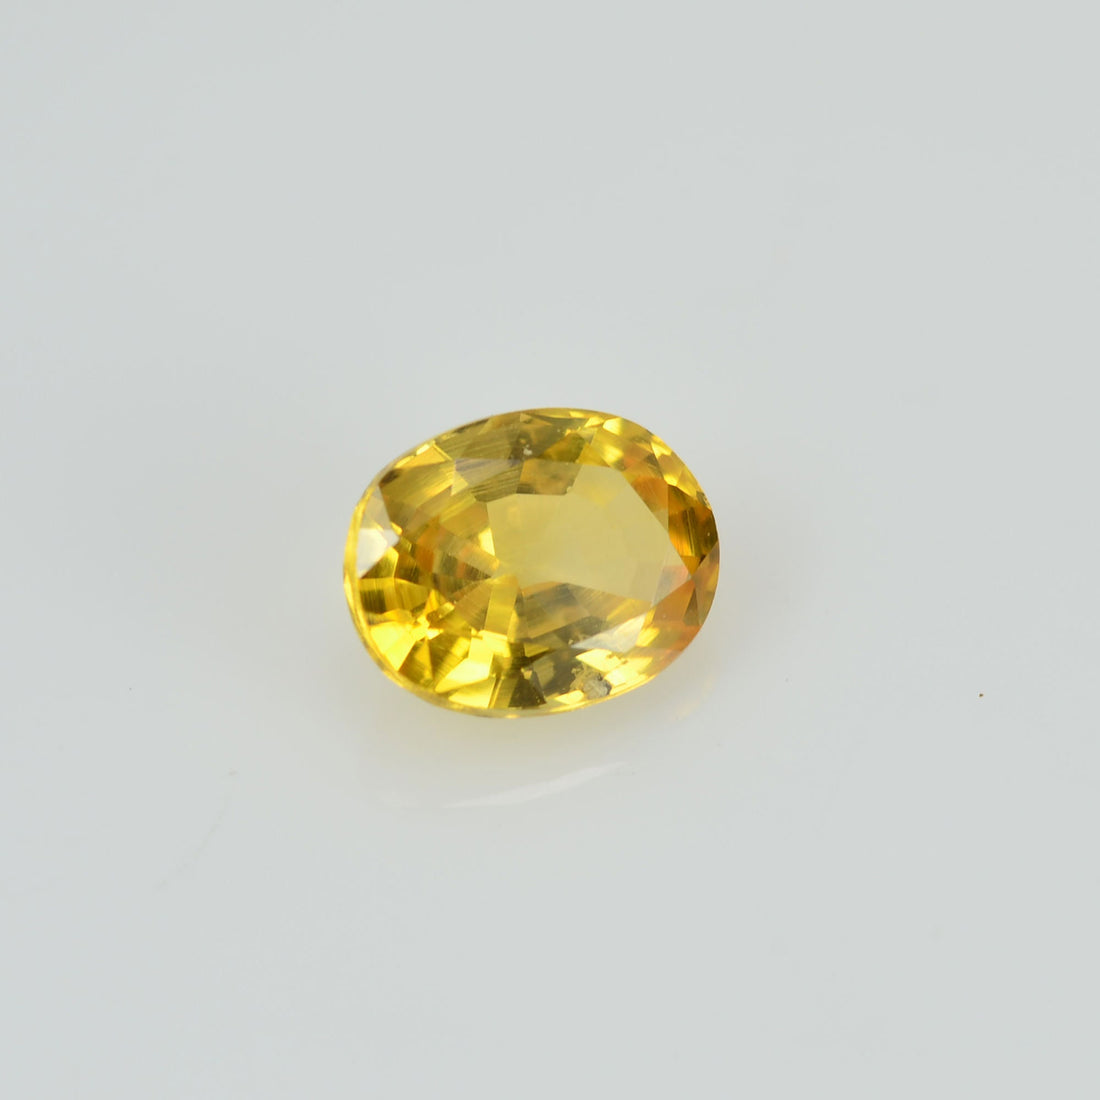 0.40 cts Natural Yellow Sapphire Loose Gemstone Oval Cut